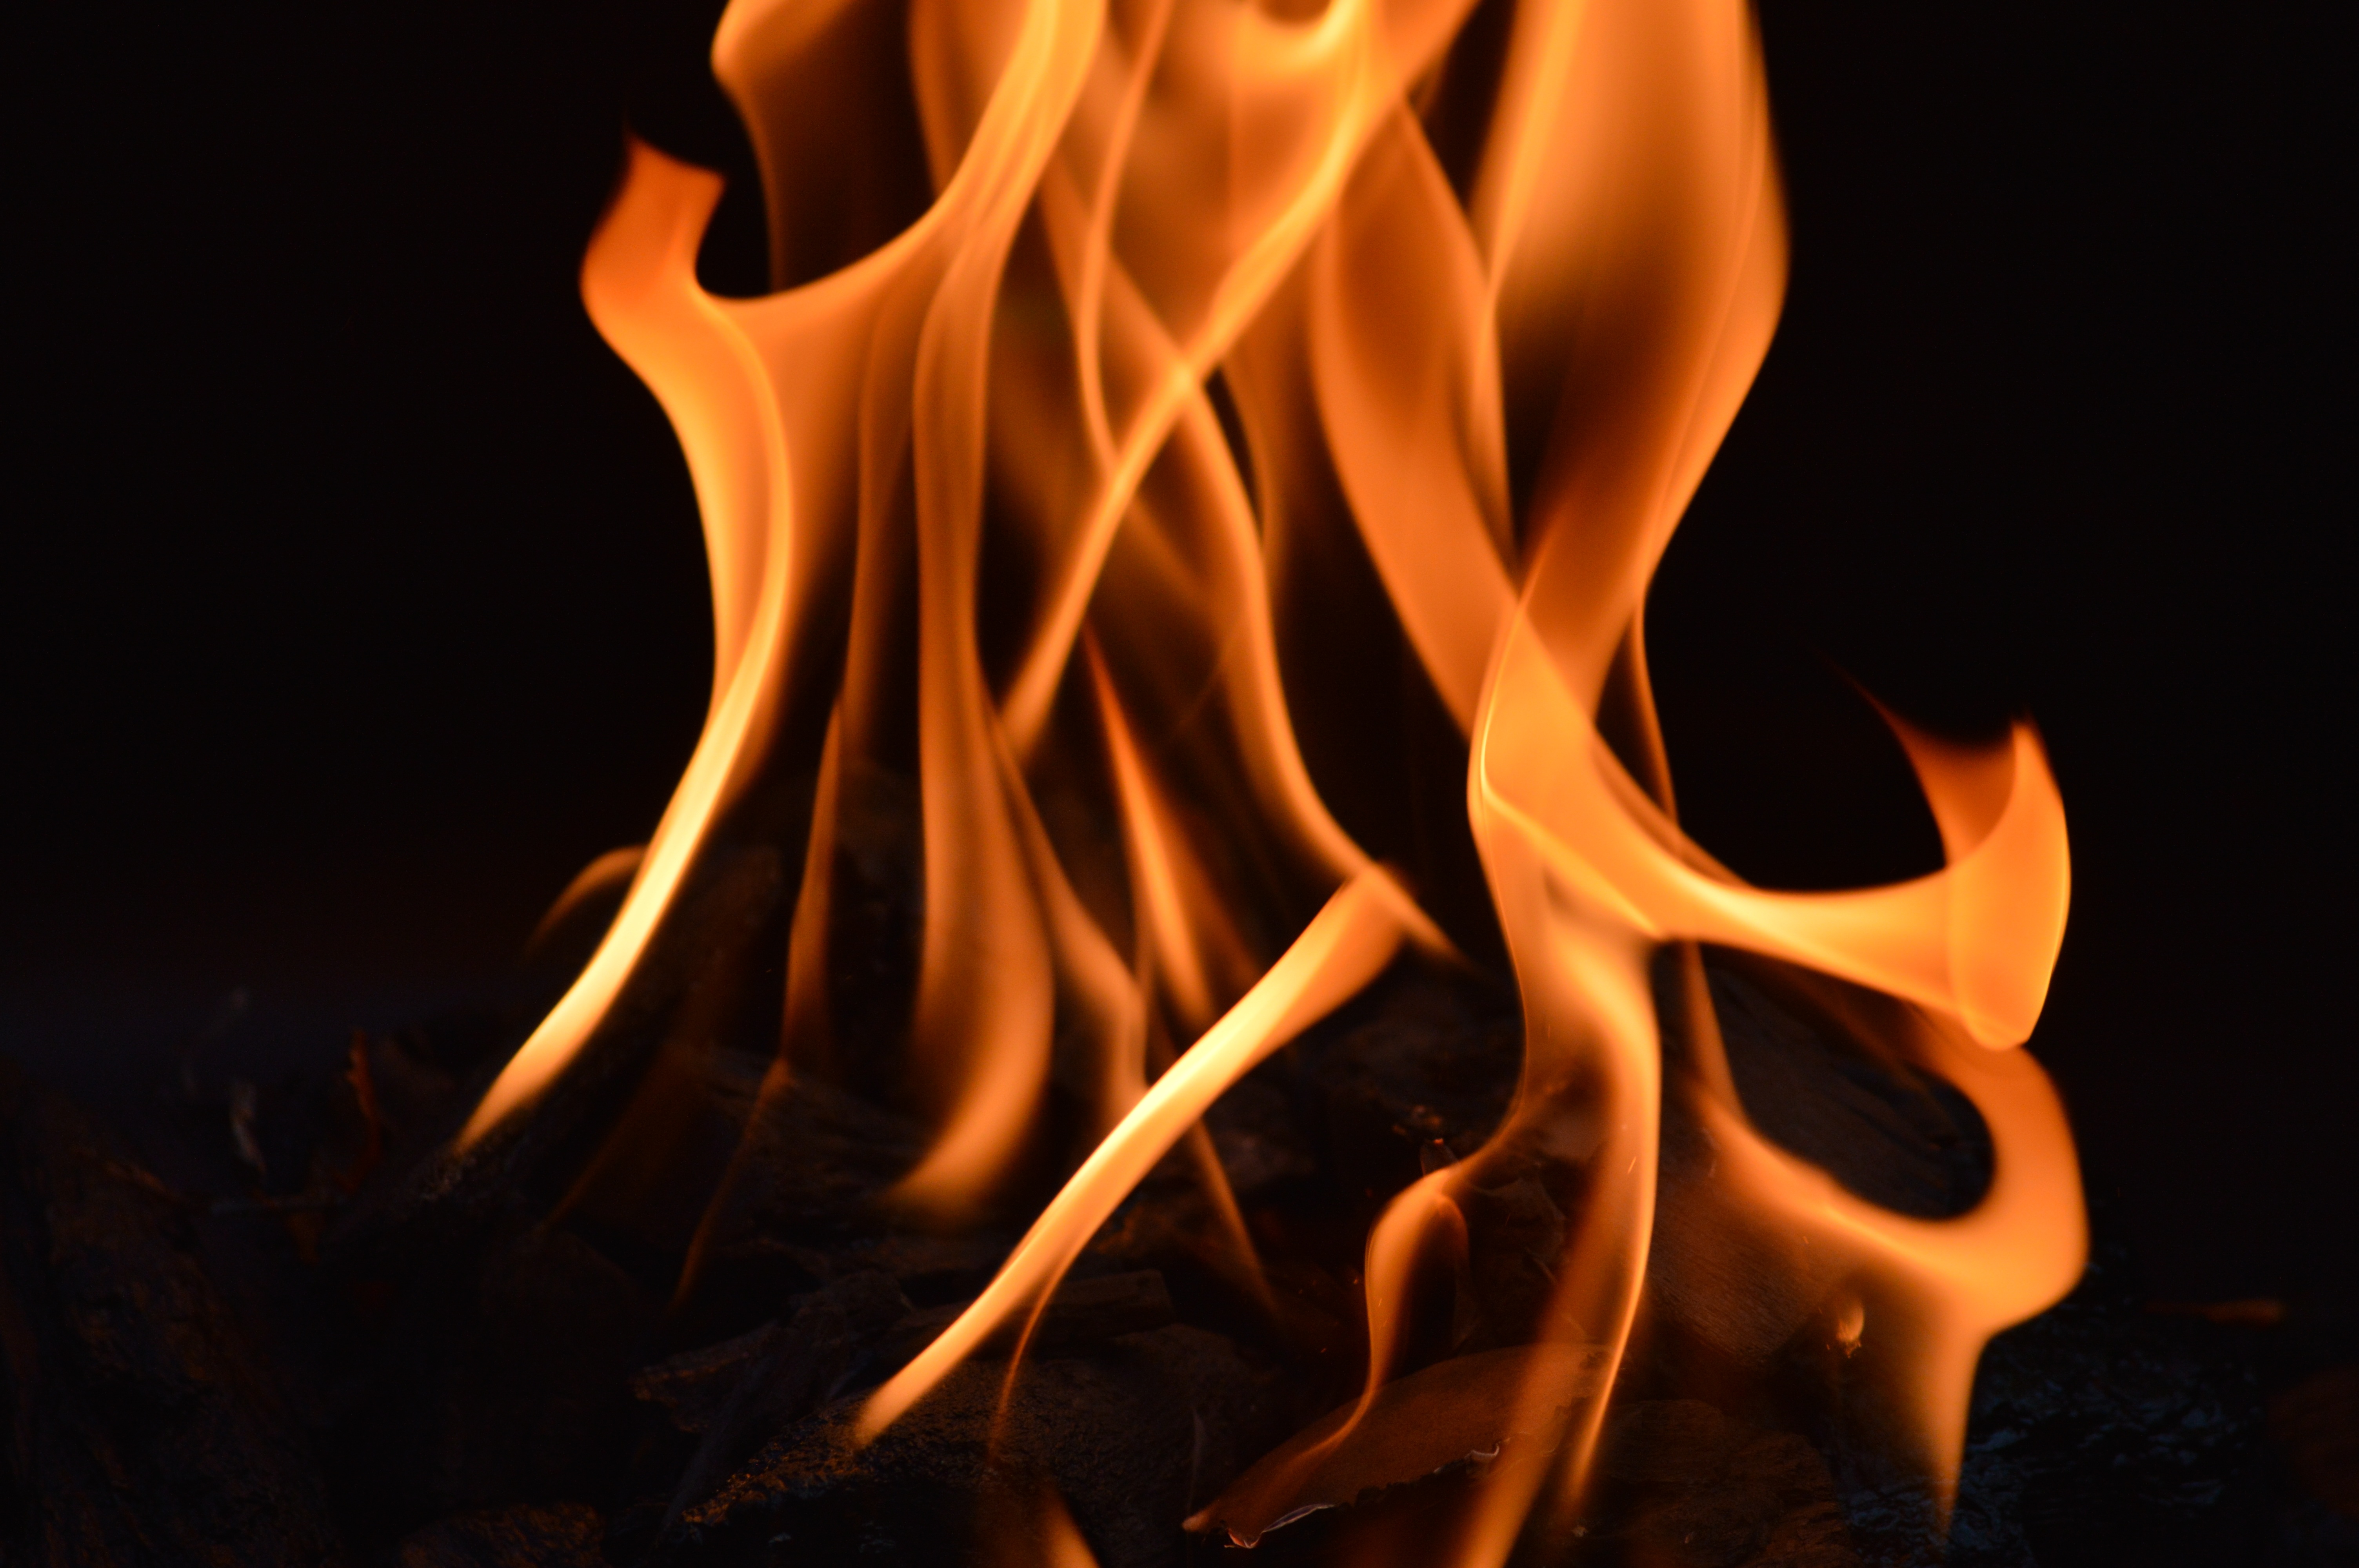 bonfire, fire, abstract, flame iphone wallpaper